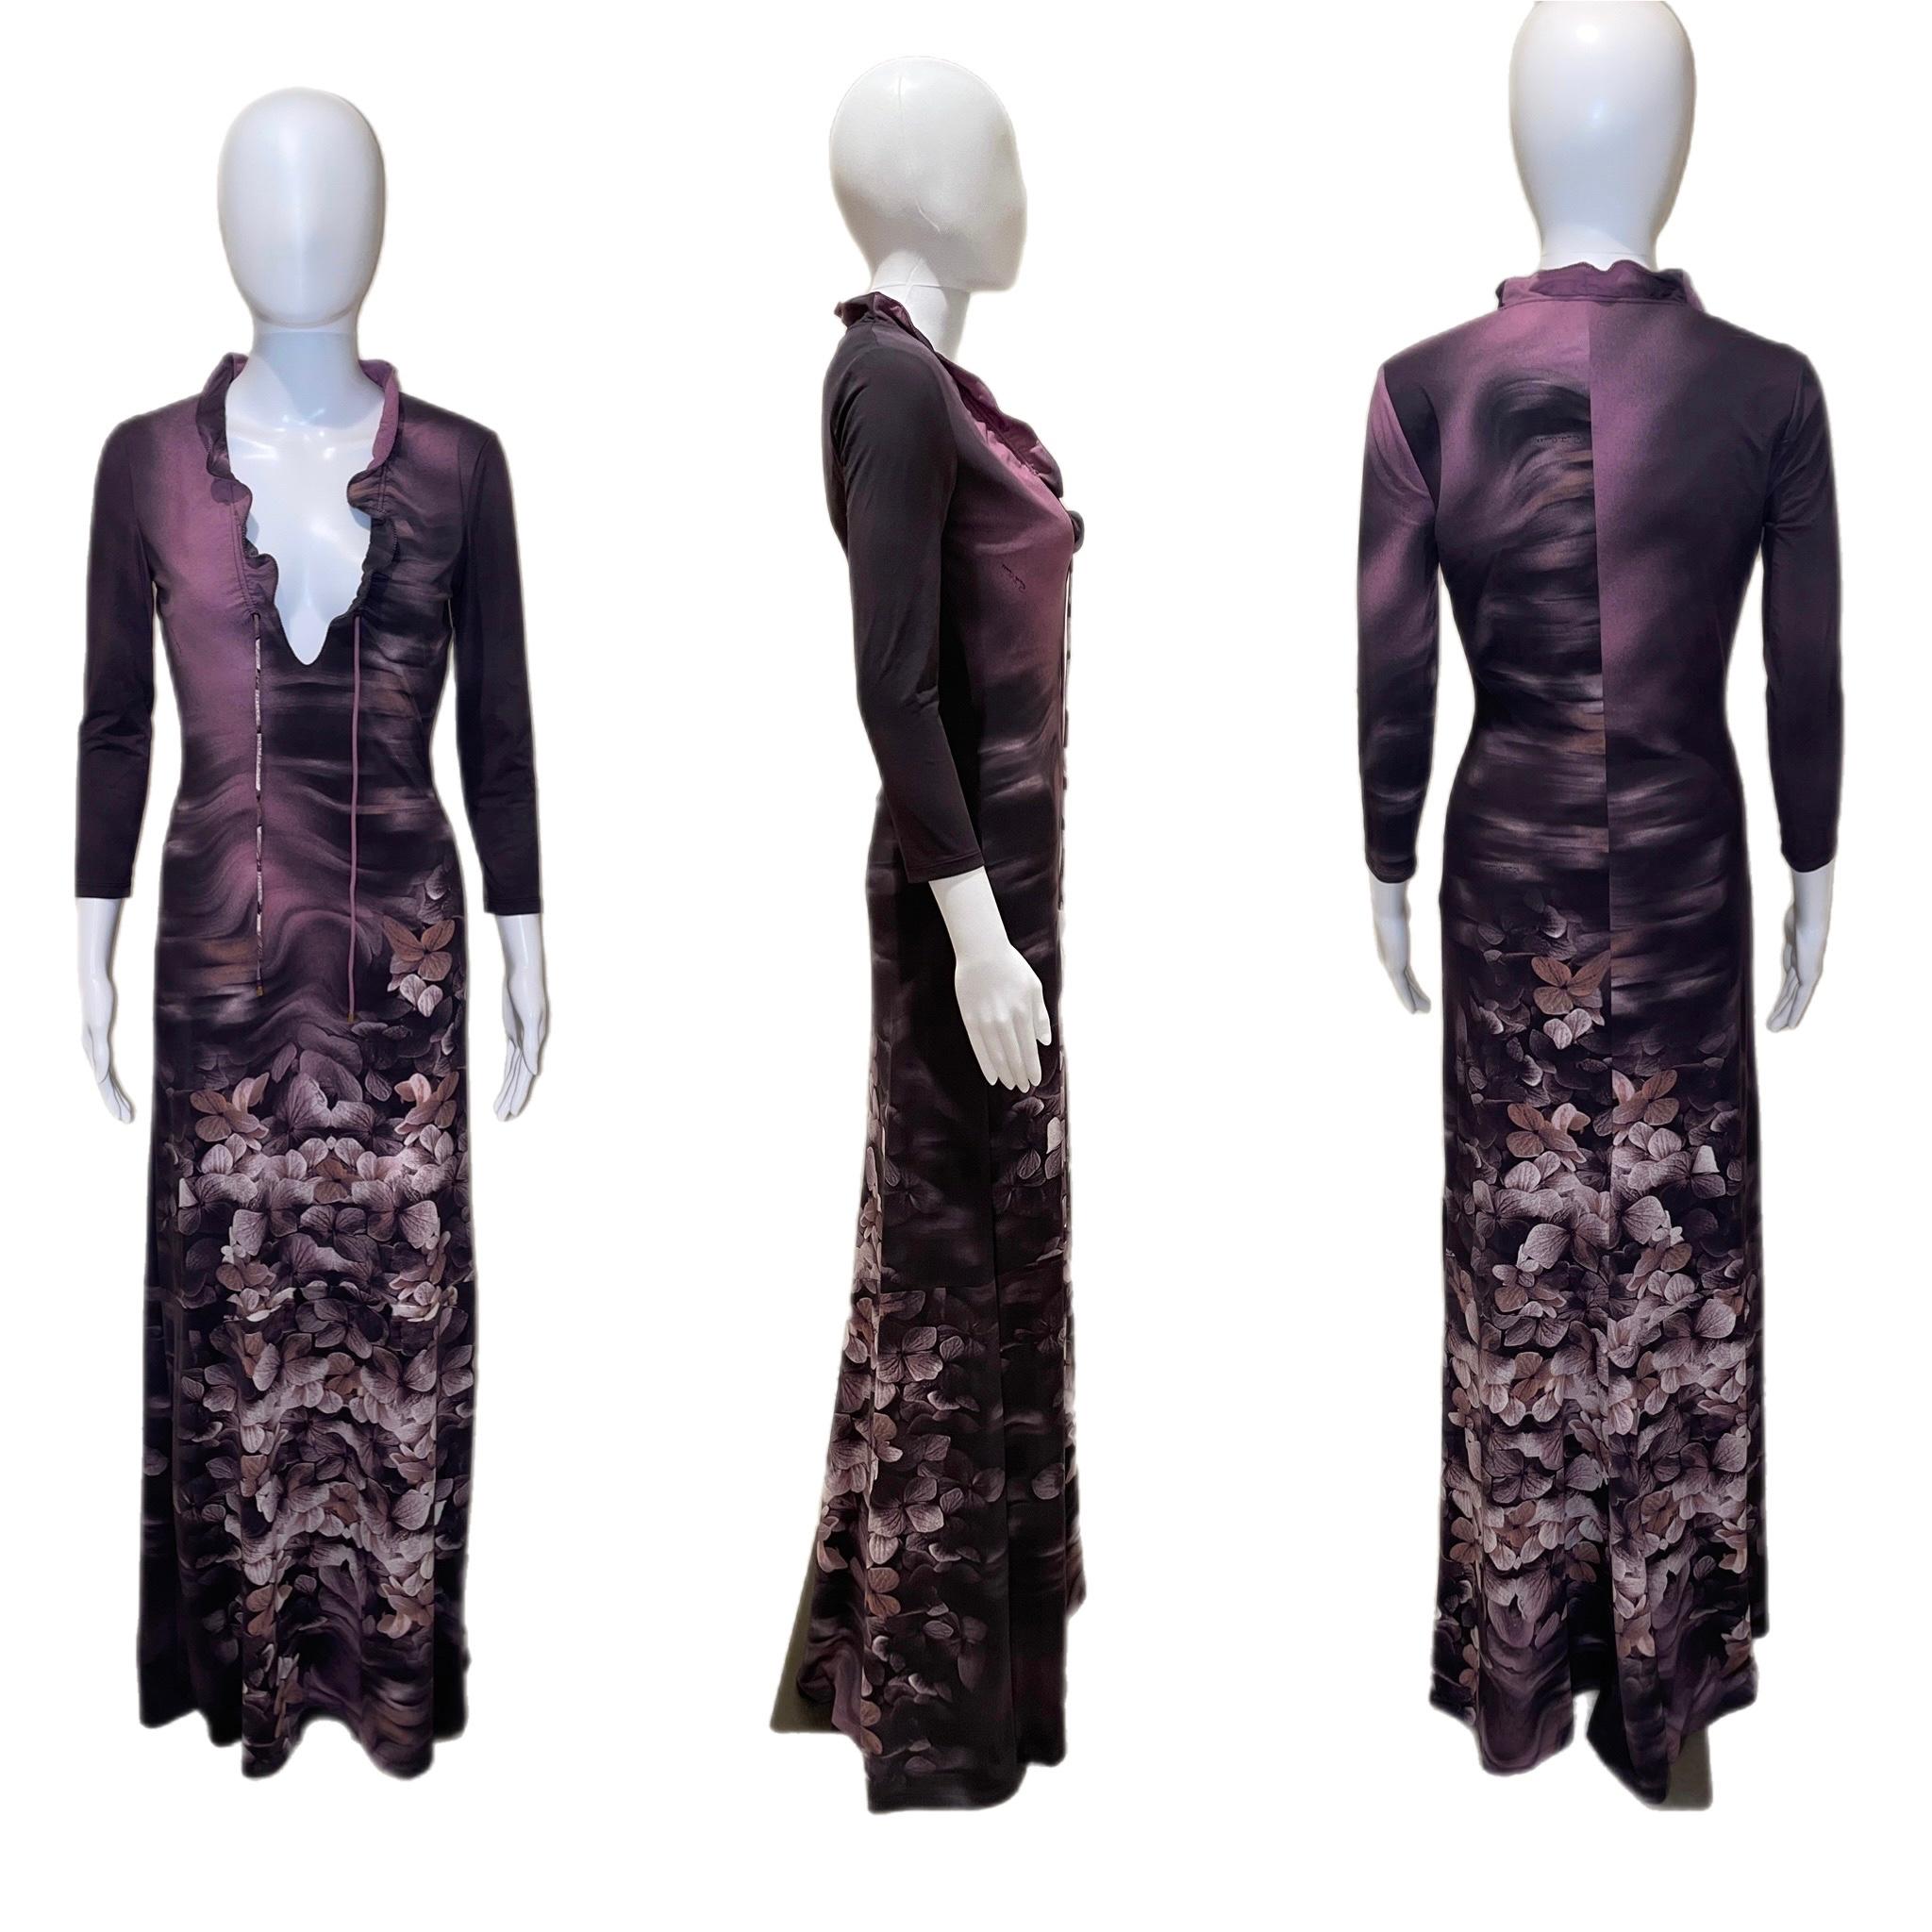 2011 Roberto Cavalli purple maxi evening dress with flowers. Ruffle collar that has an adjustable drawstring. No flaws, looks unworn. Size IT40, true to size. Tons of stretch, very soft. *FINAL SALE. NO EXCEPTIONS*